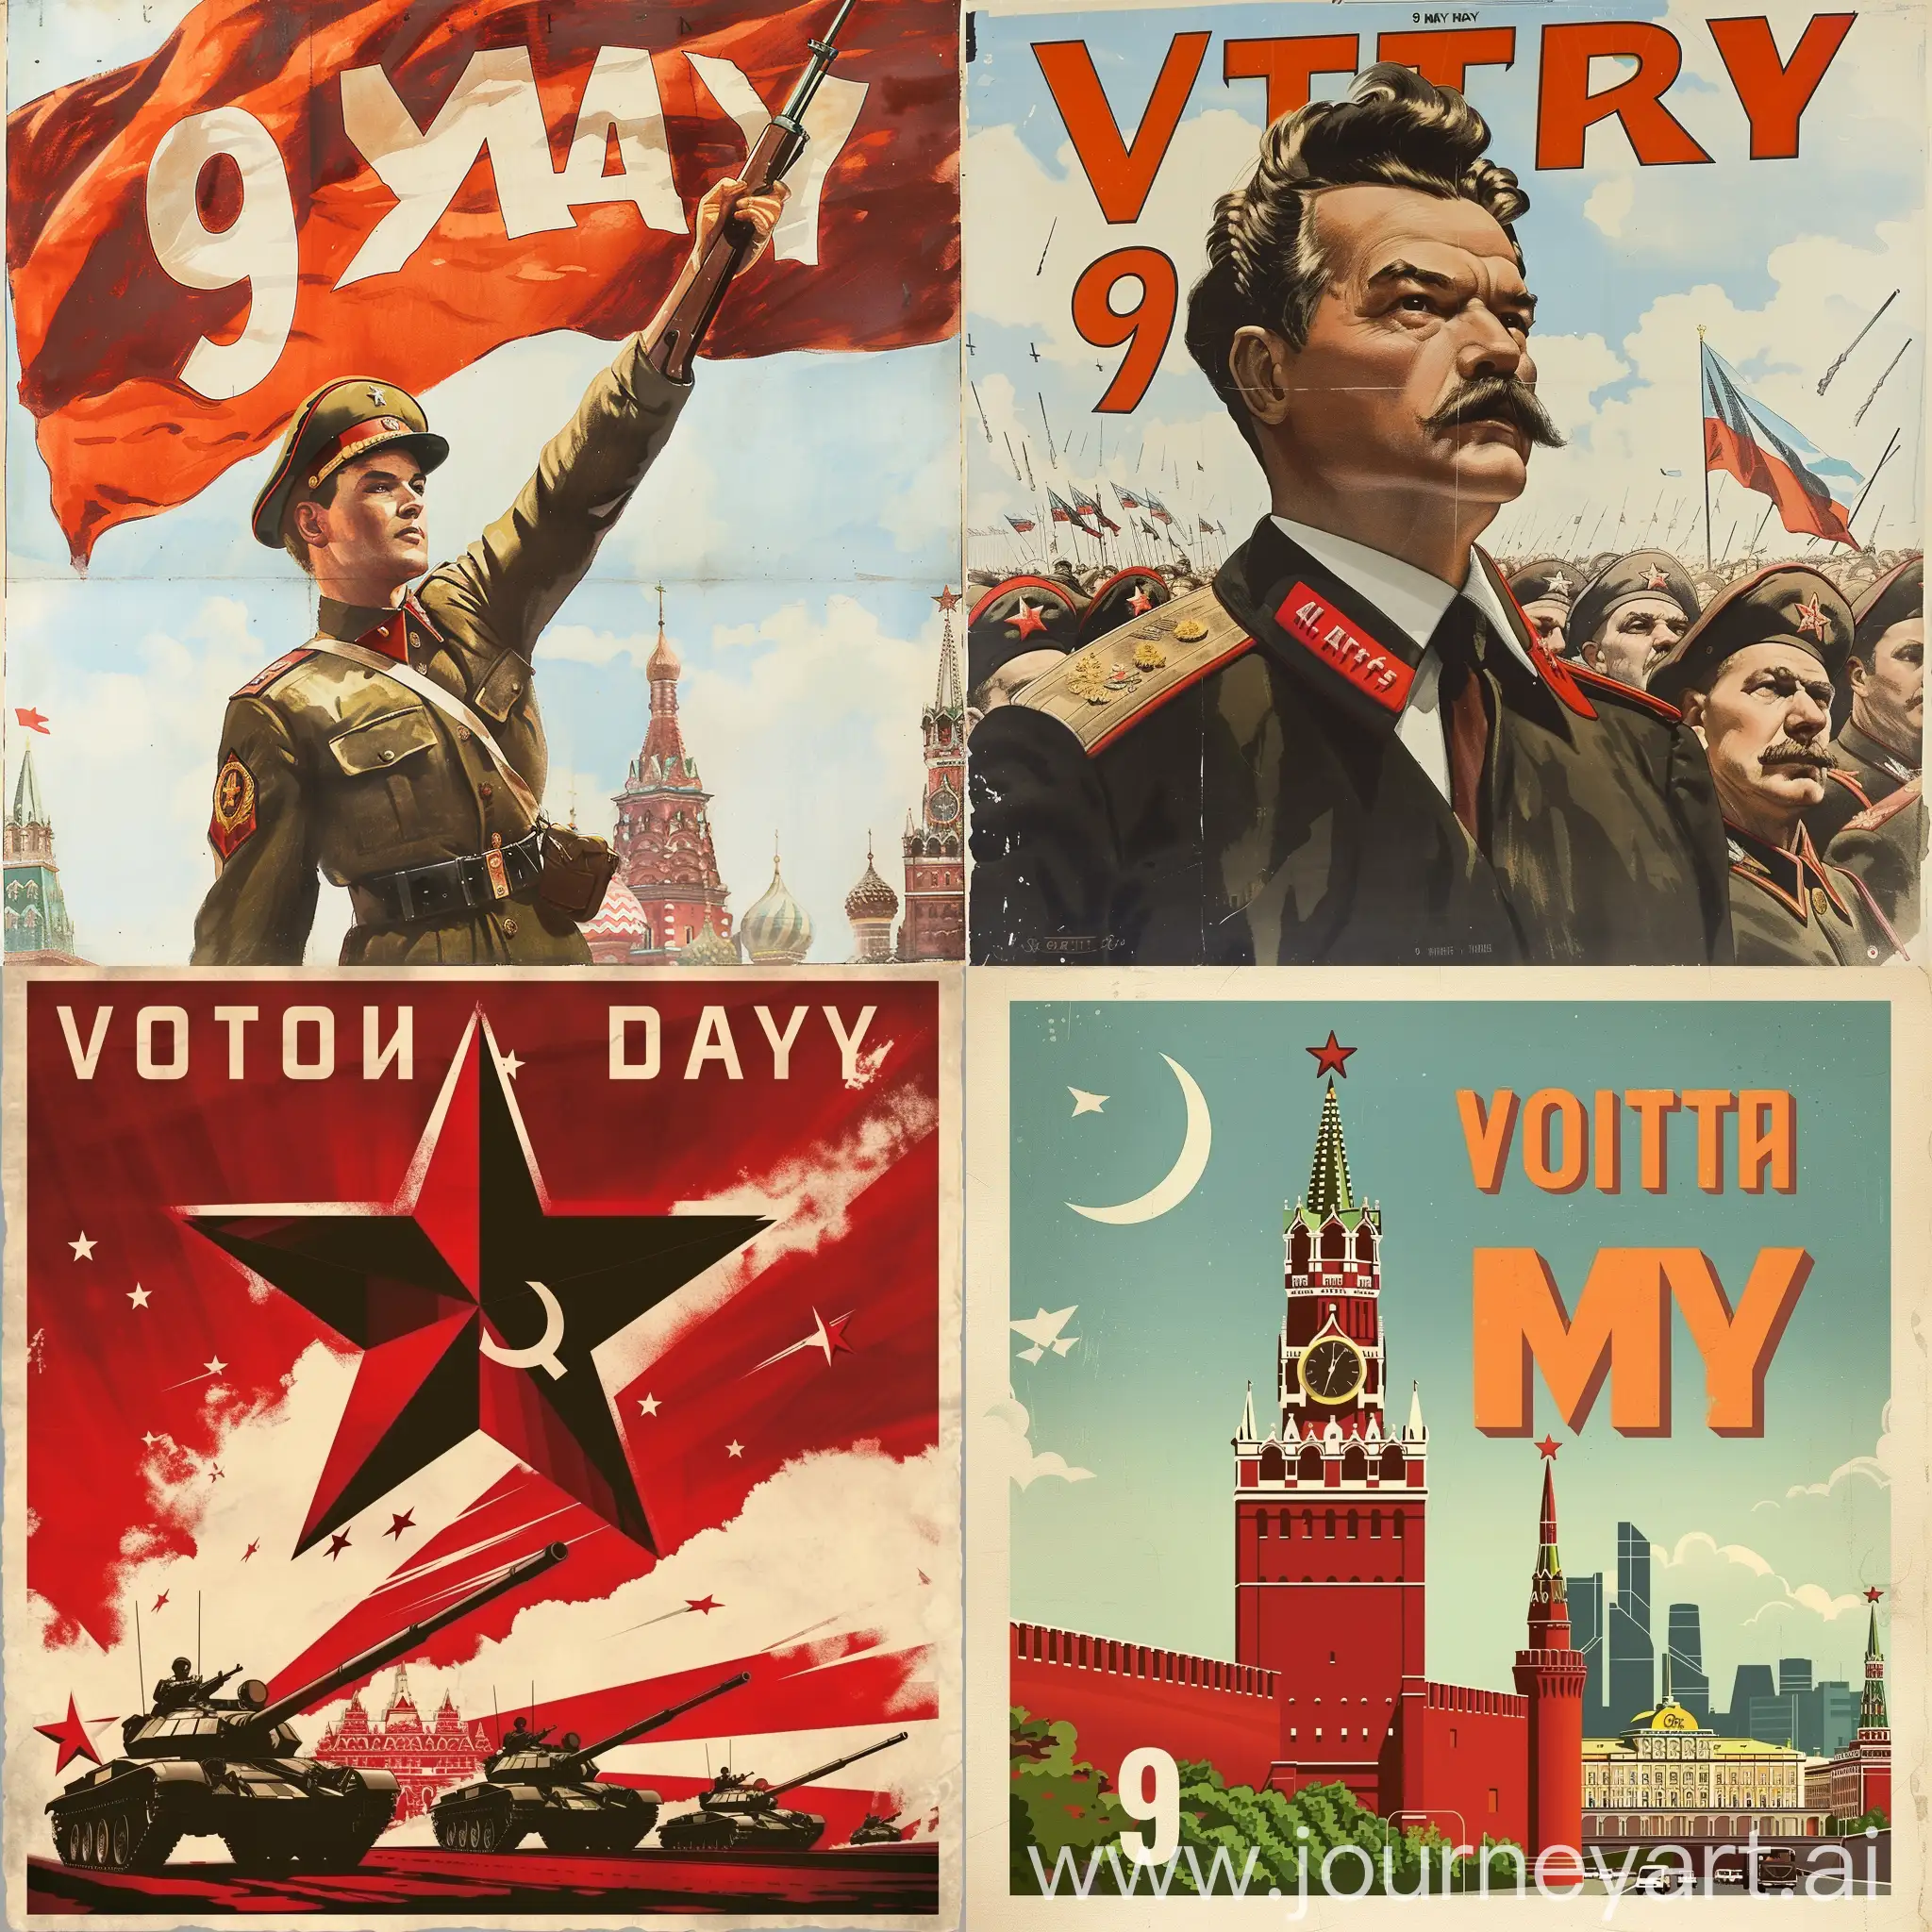 Victory-Day-9-May-Commemorative-Poster-with-National-Flag-and-Soldiers